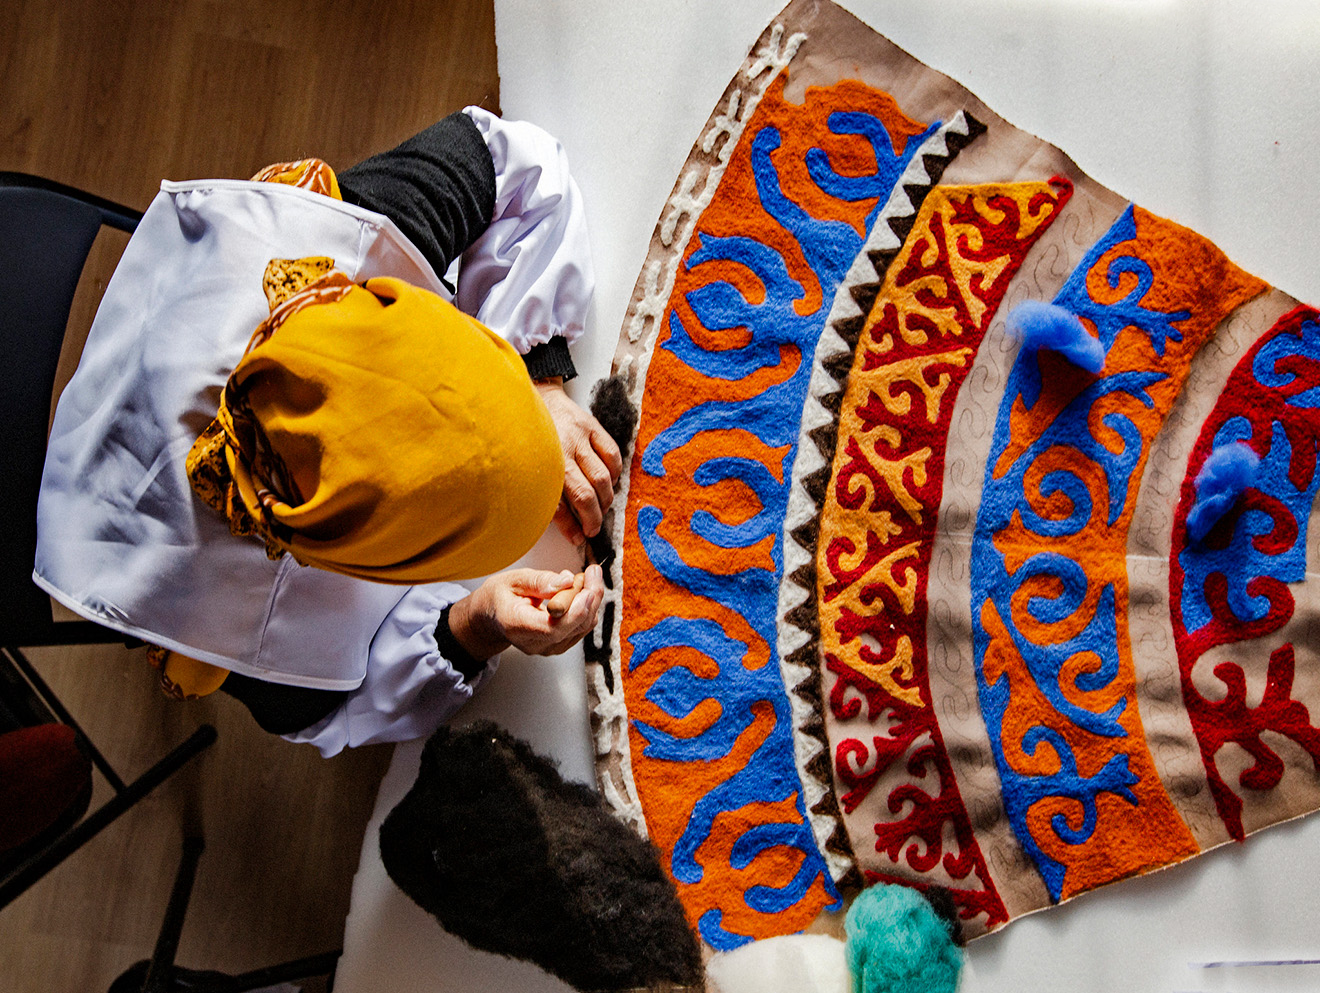 A woman working with felt details on the skirt.